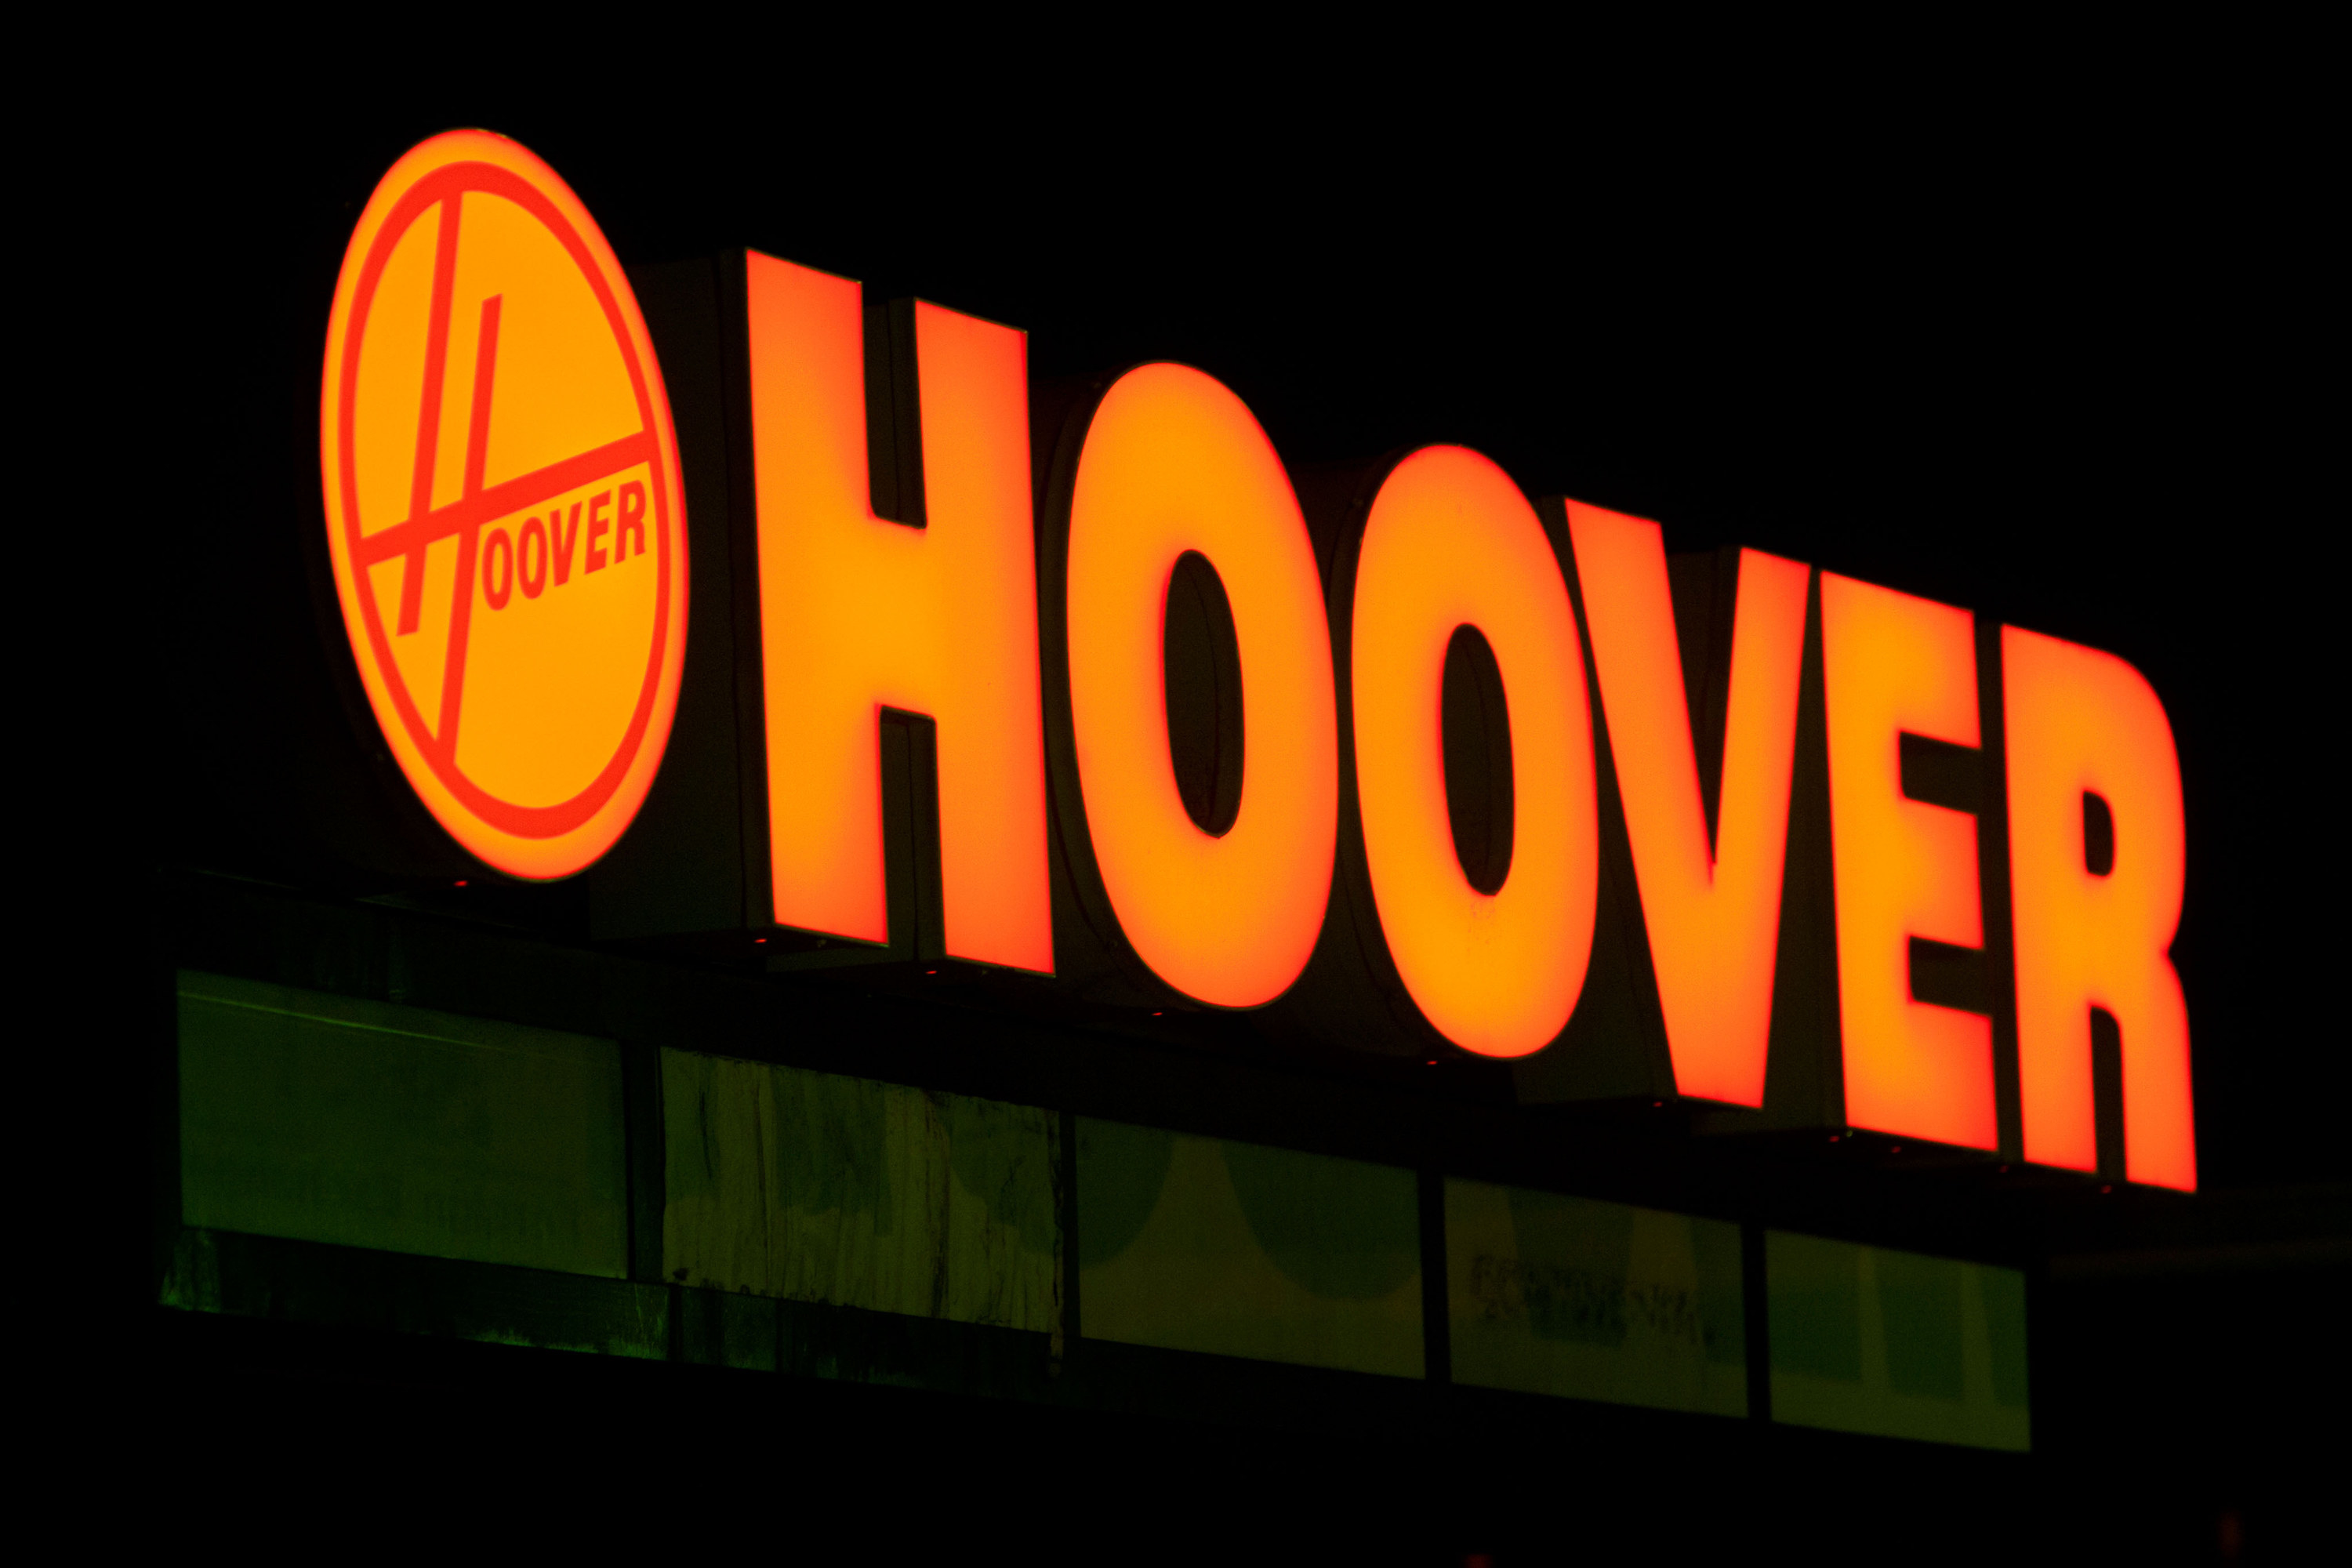 A Hoover sign on a storefront at night